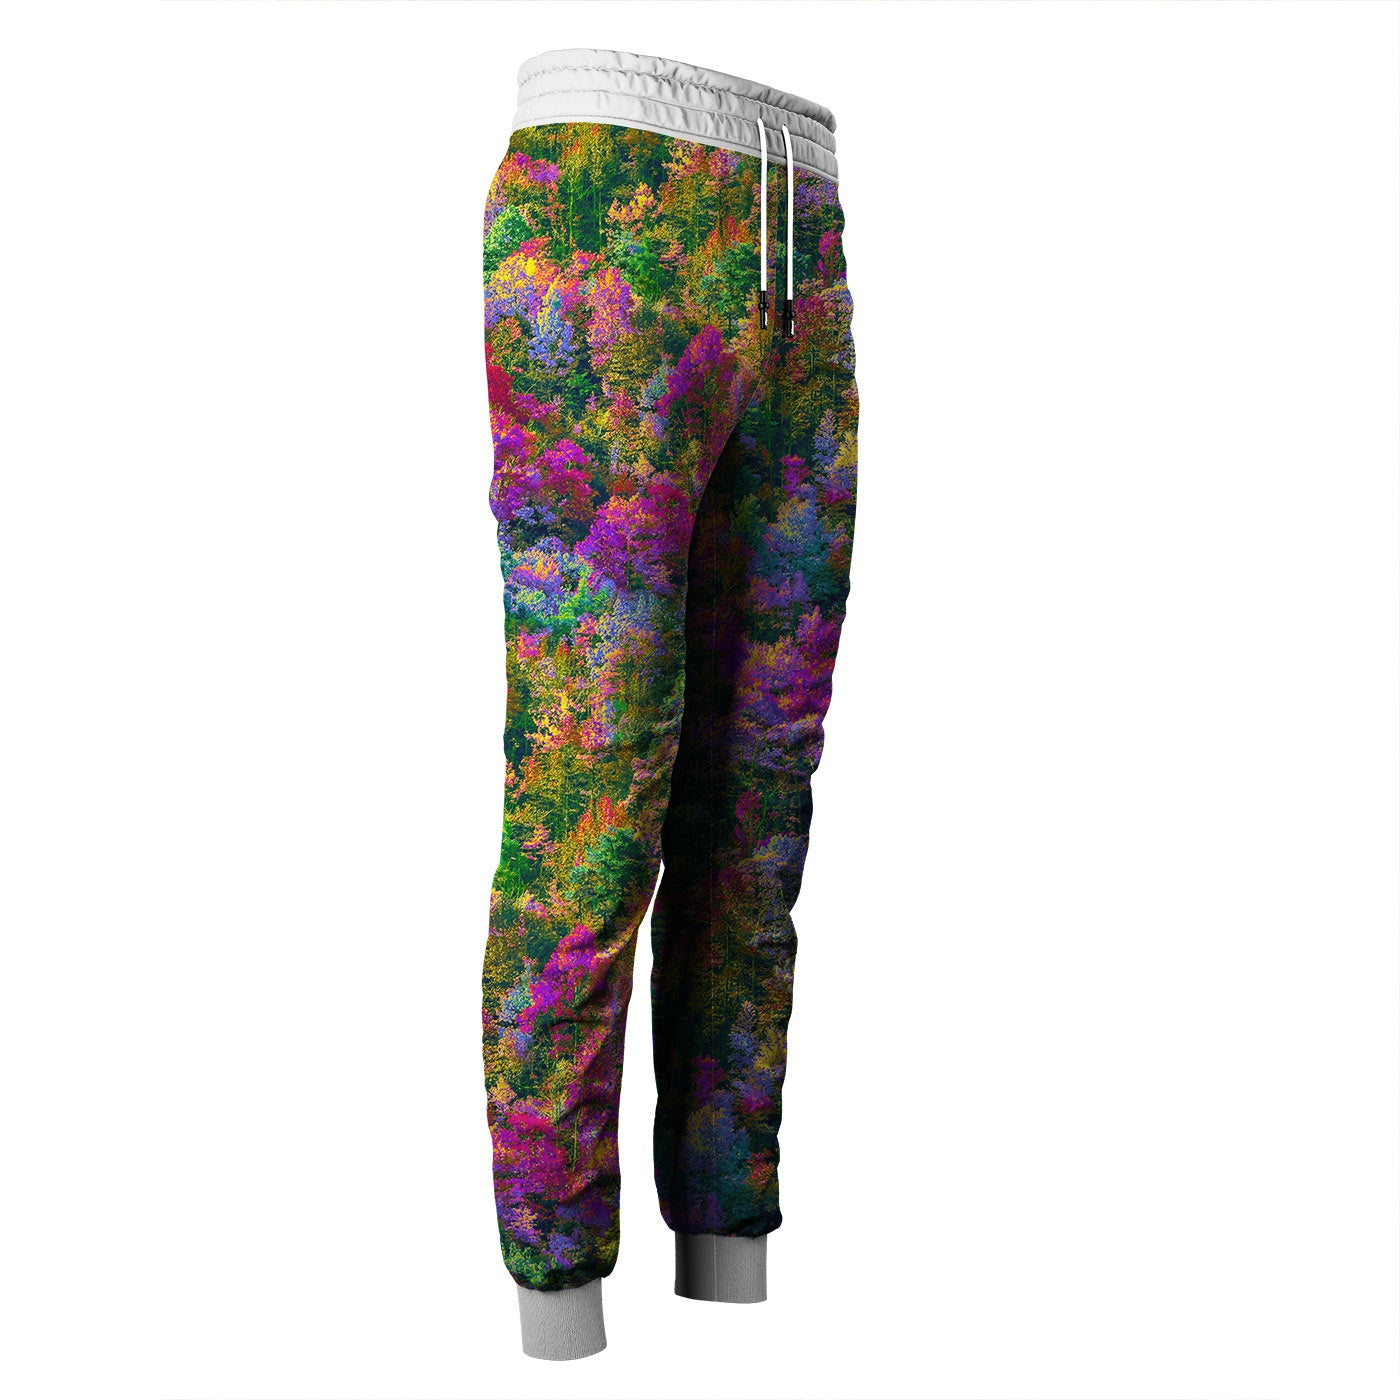 Psychedelic Forest Sweatpants